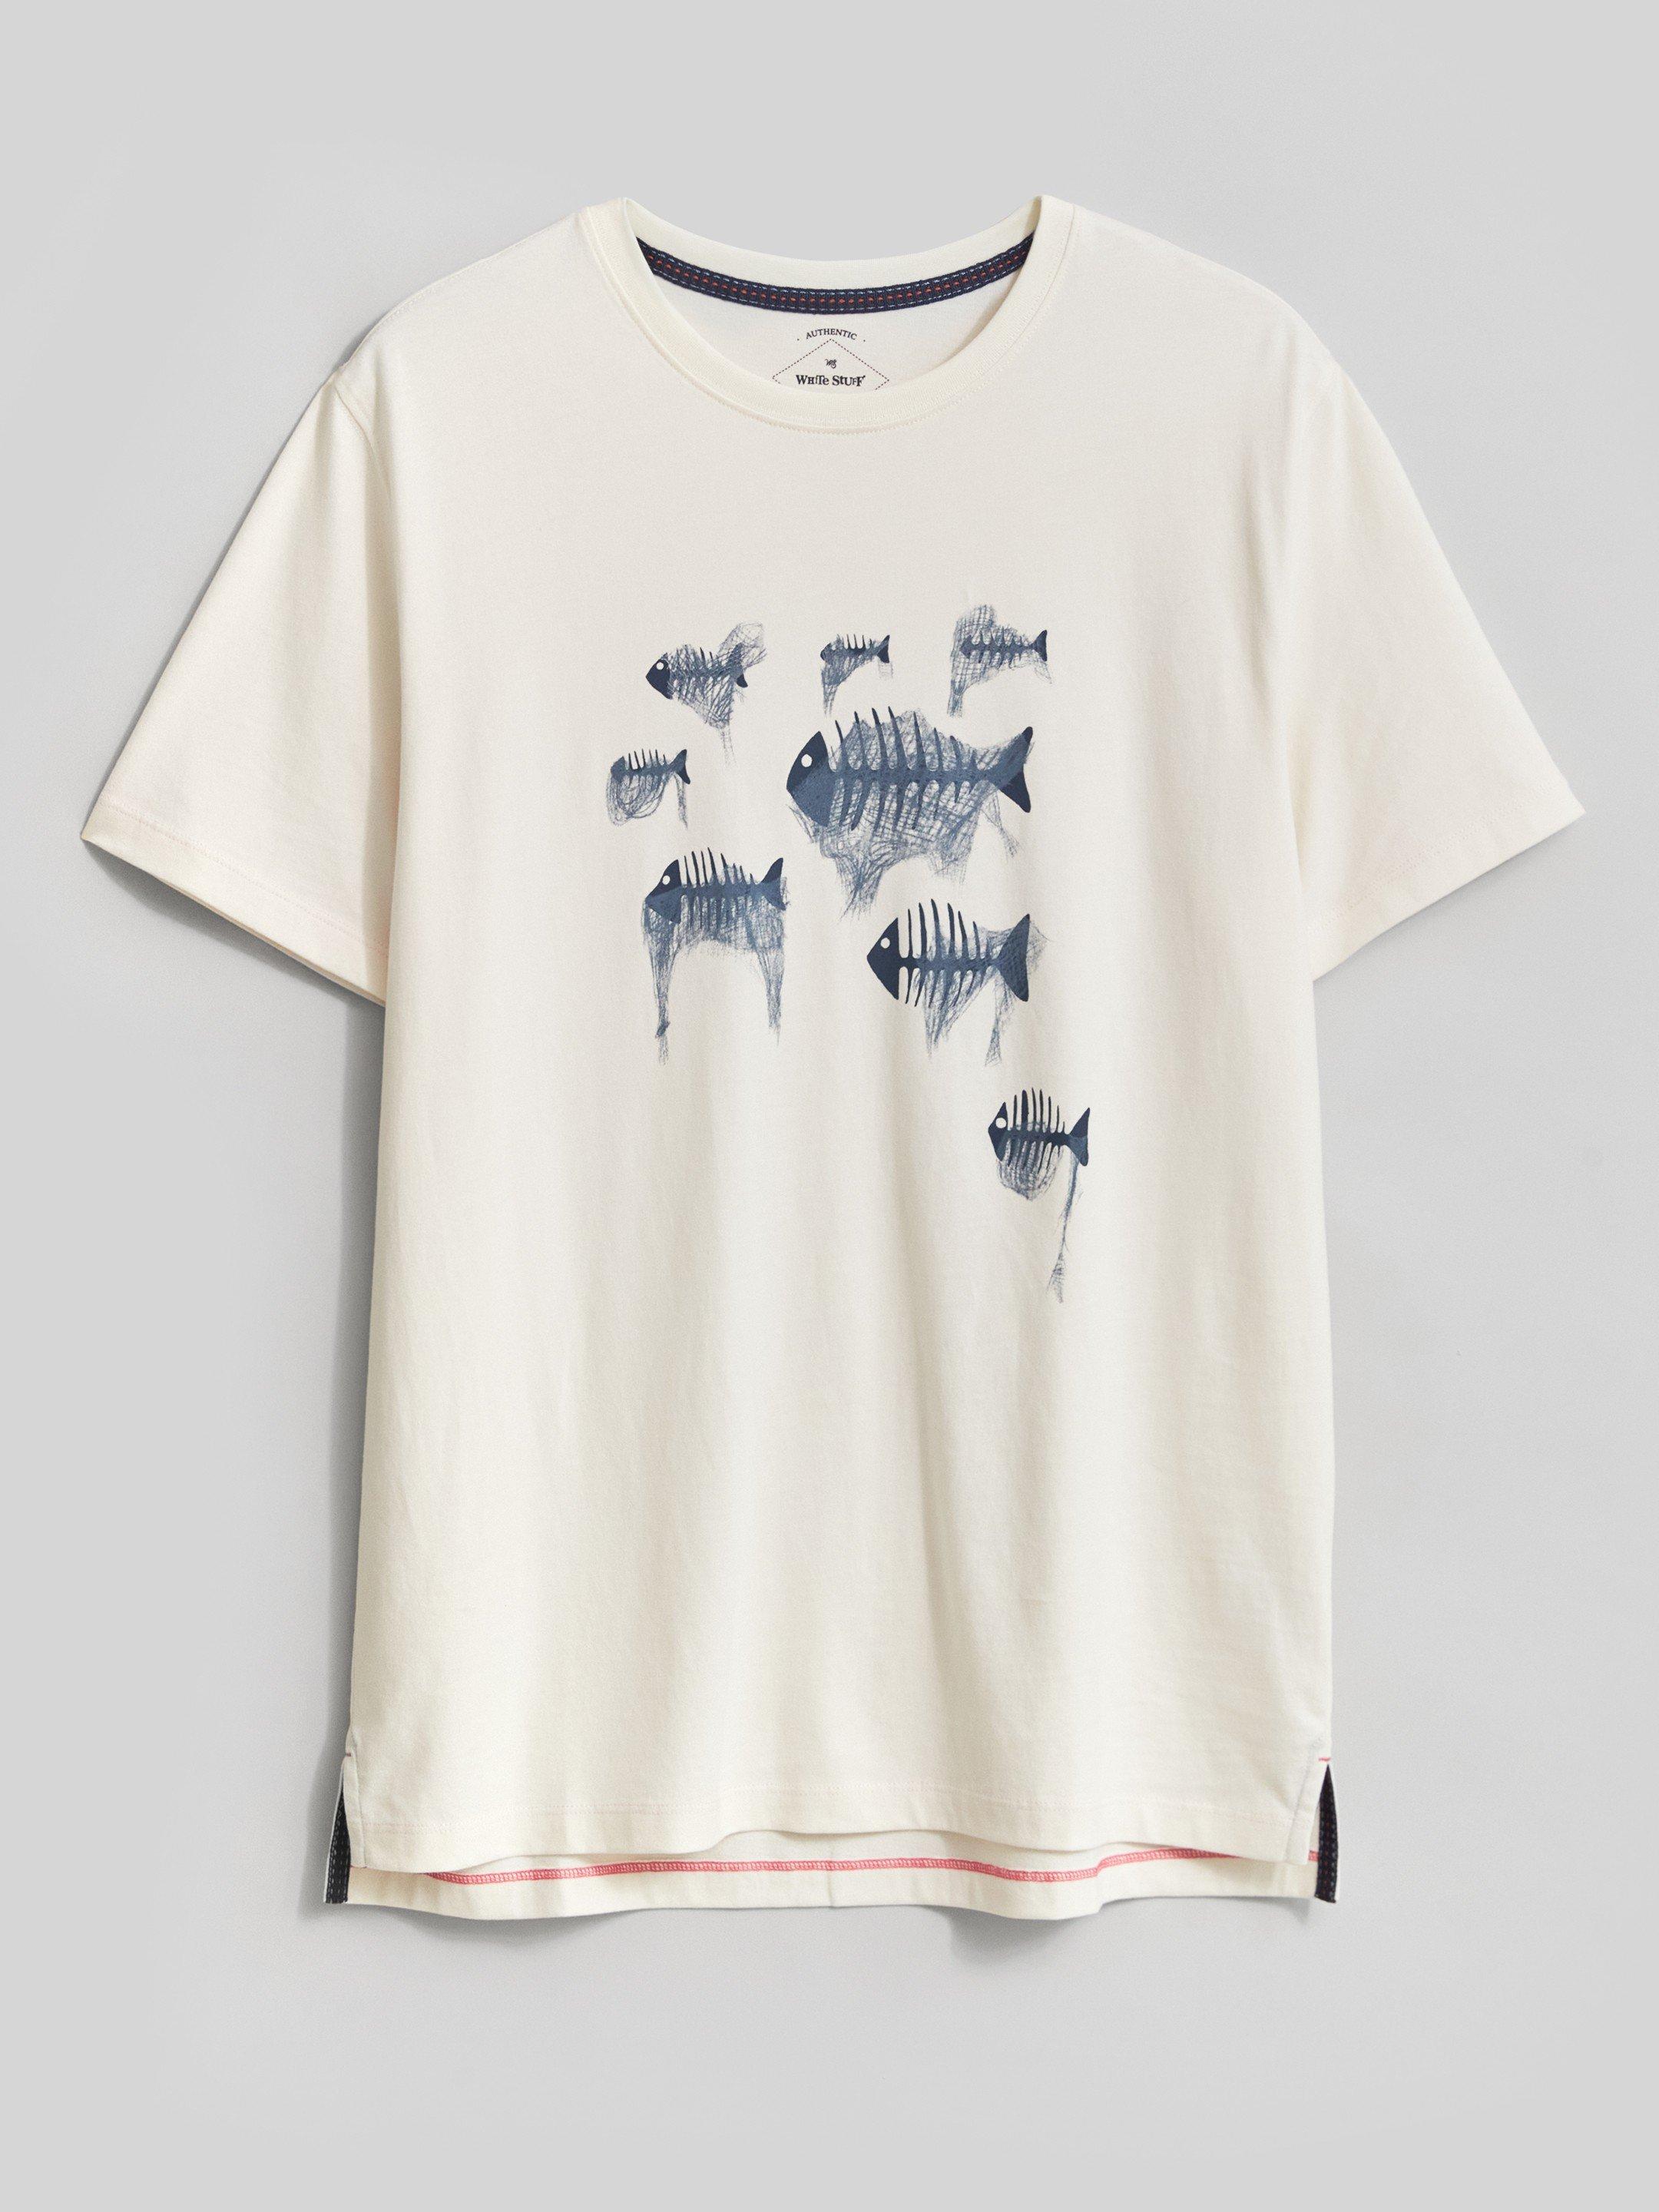 Ghost Net Graphic Tshirt in NAT WHITE - FLAT FRONT